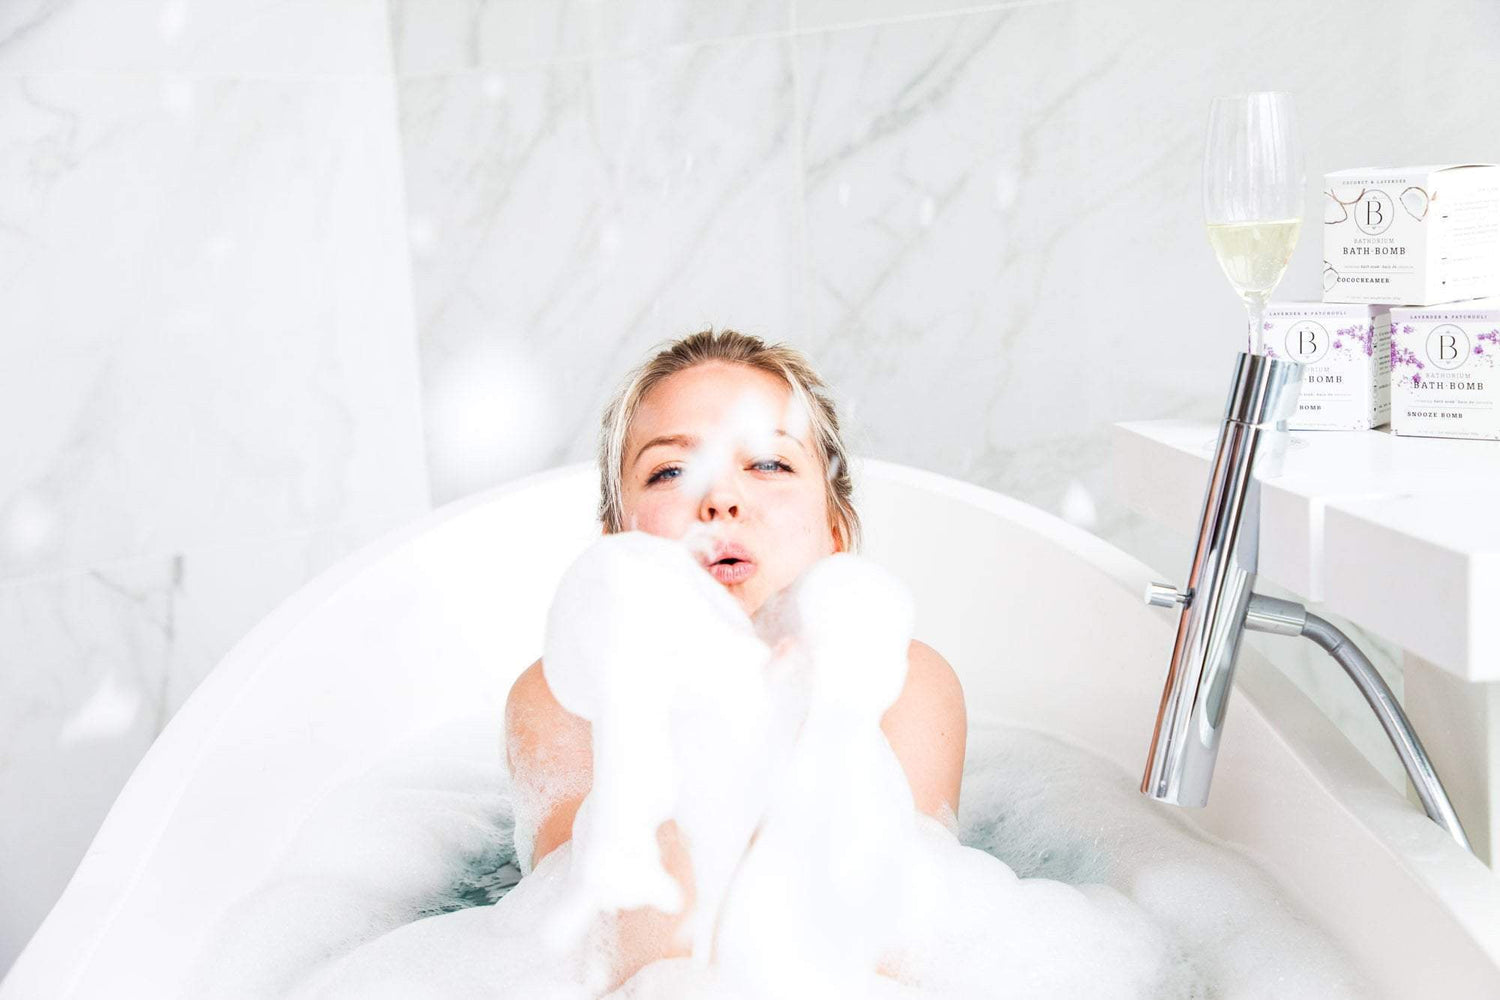 Psst... Hot Baths Are Good For You!